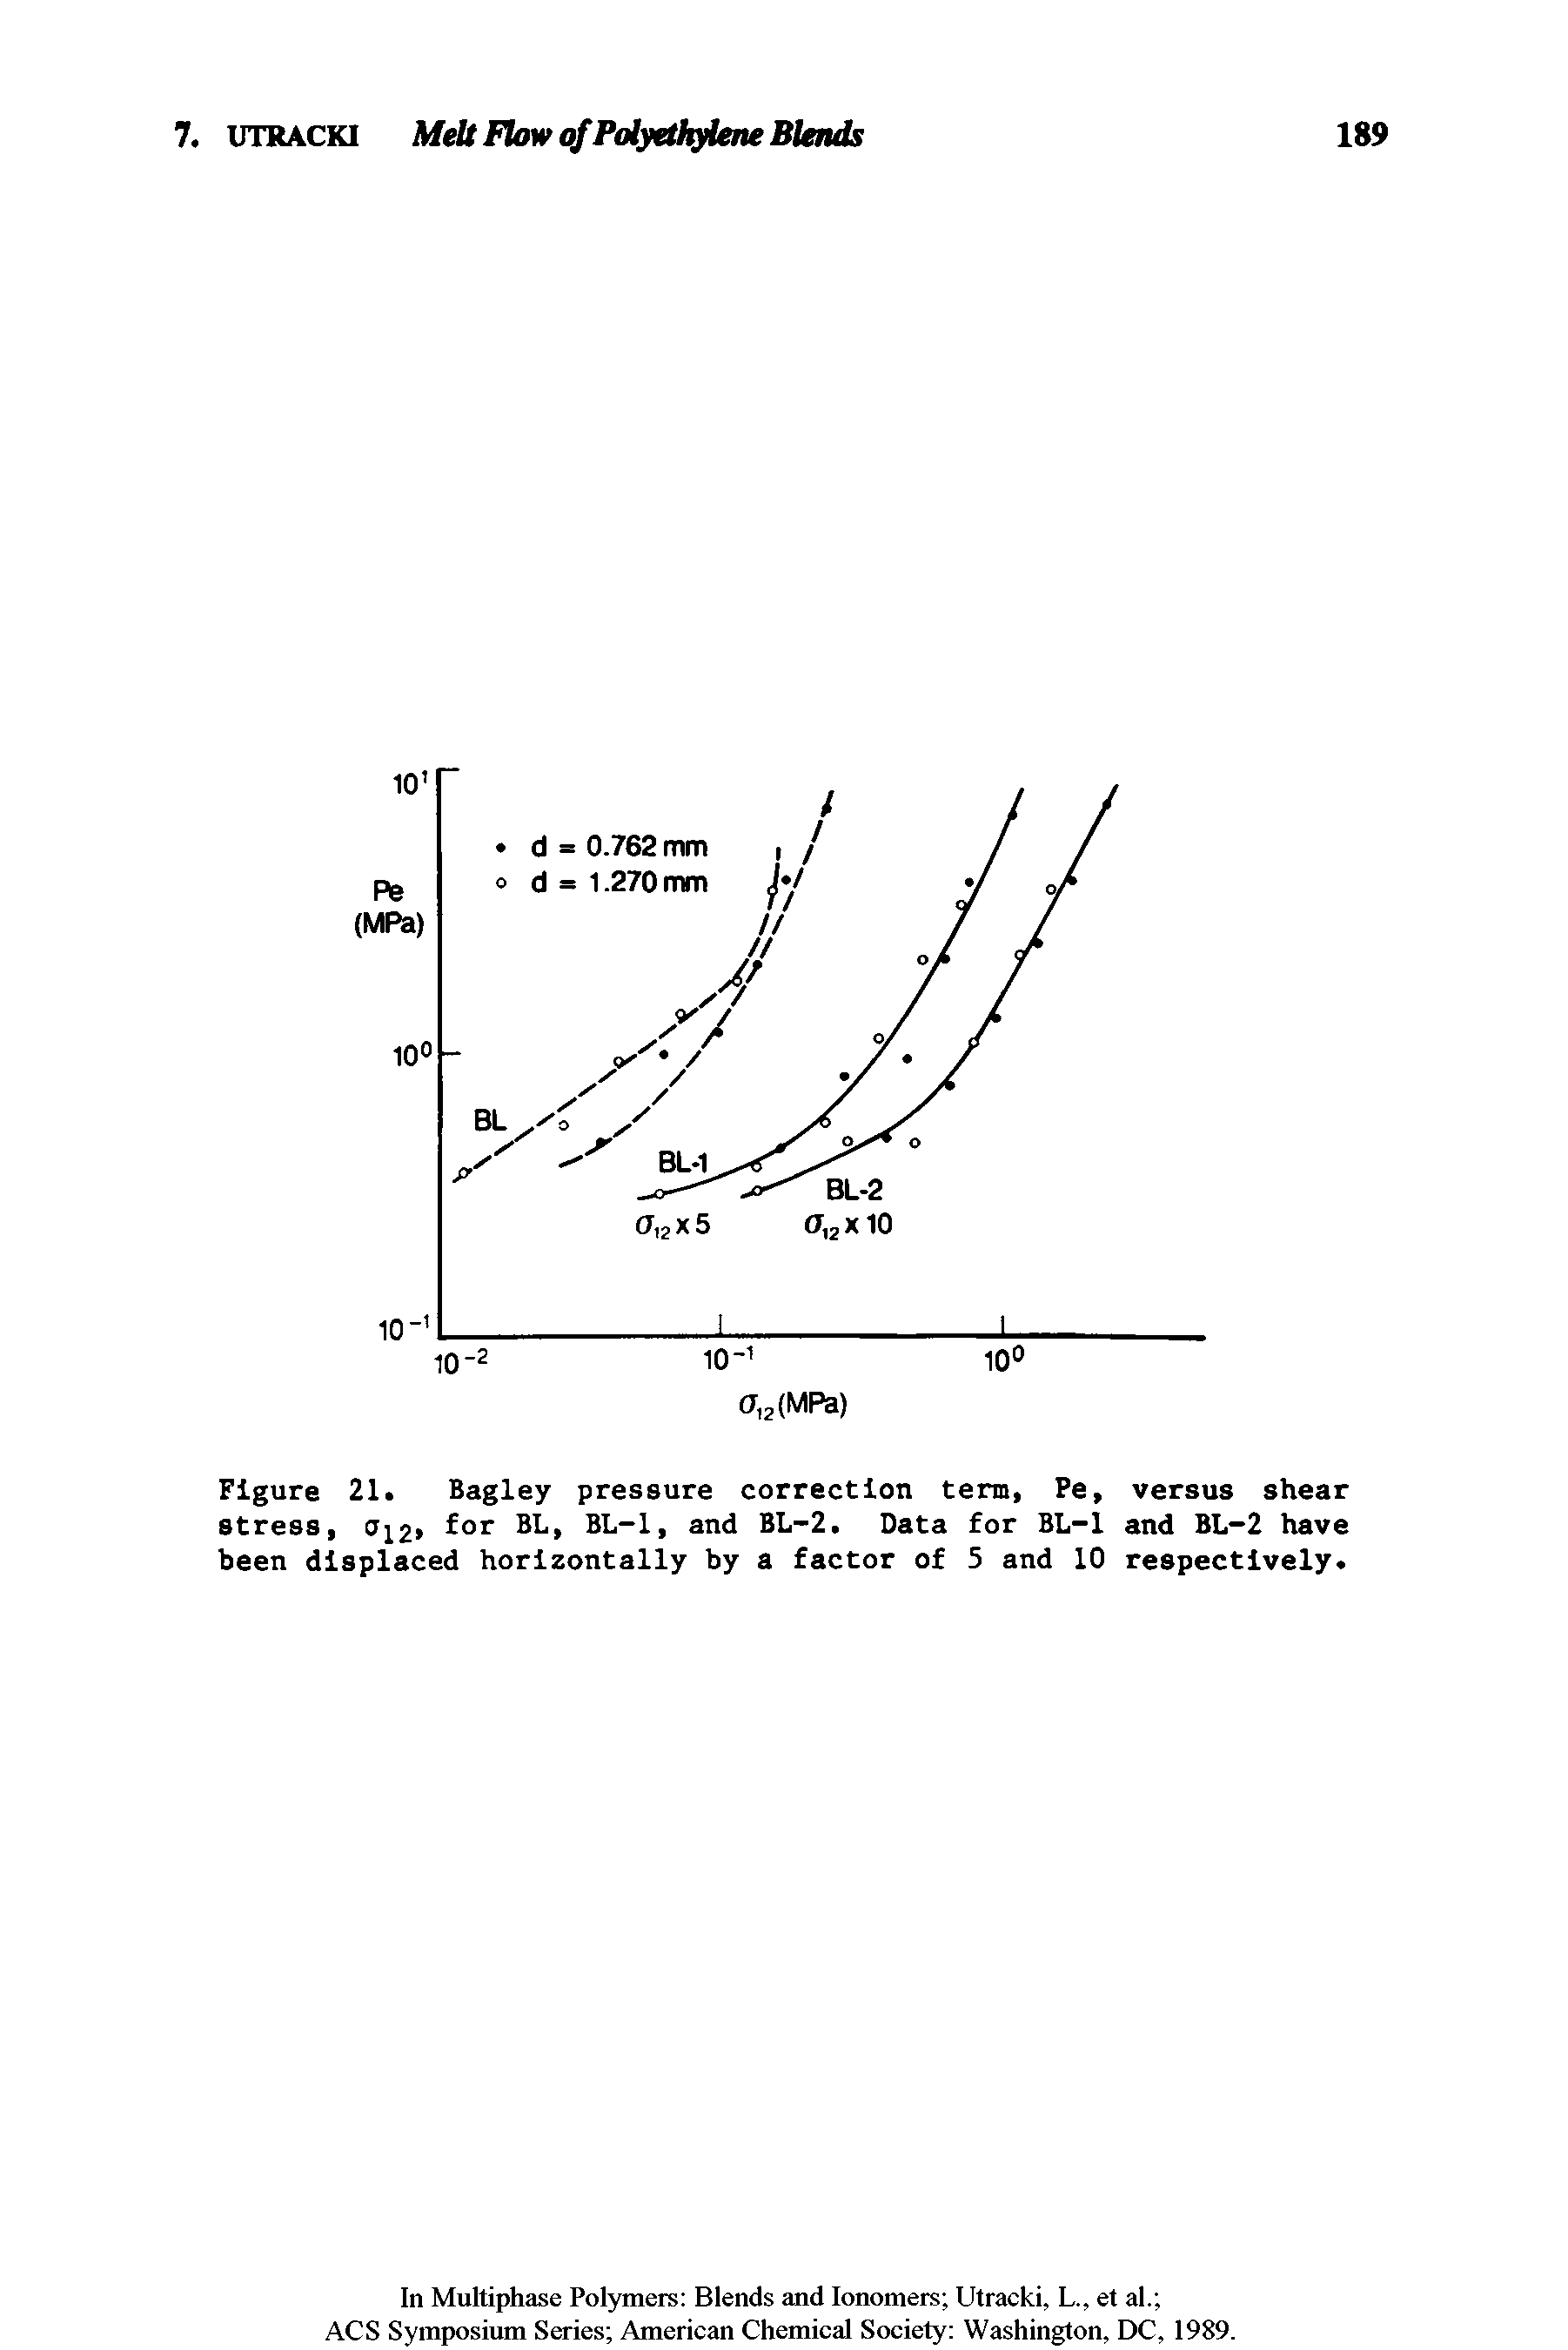 Figure 21. Bagley pressure correction term, Pe, versus shear stress, ai2 L-1, and BL-2. Data for BL-1 and BL-2 have been displaced horizontally by a factor of 5 and 10 respectively.